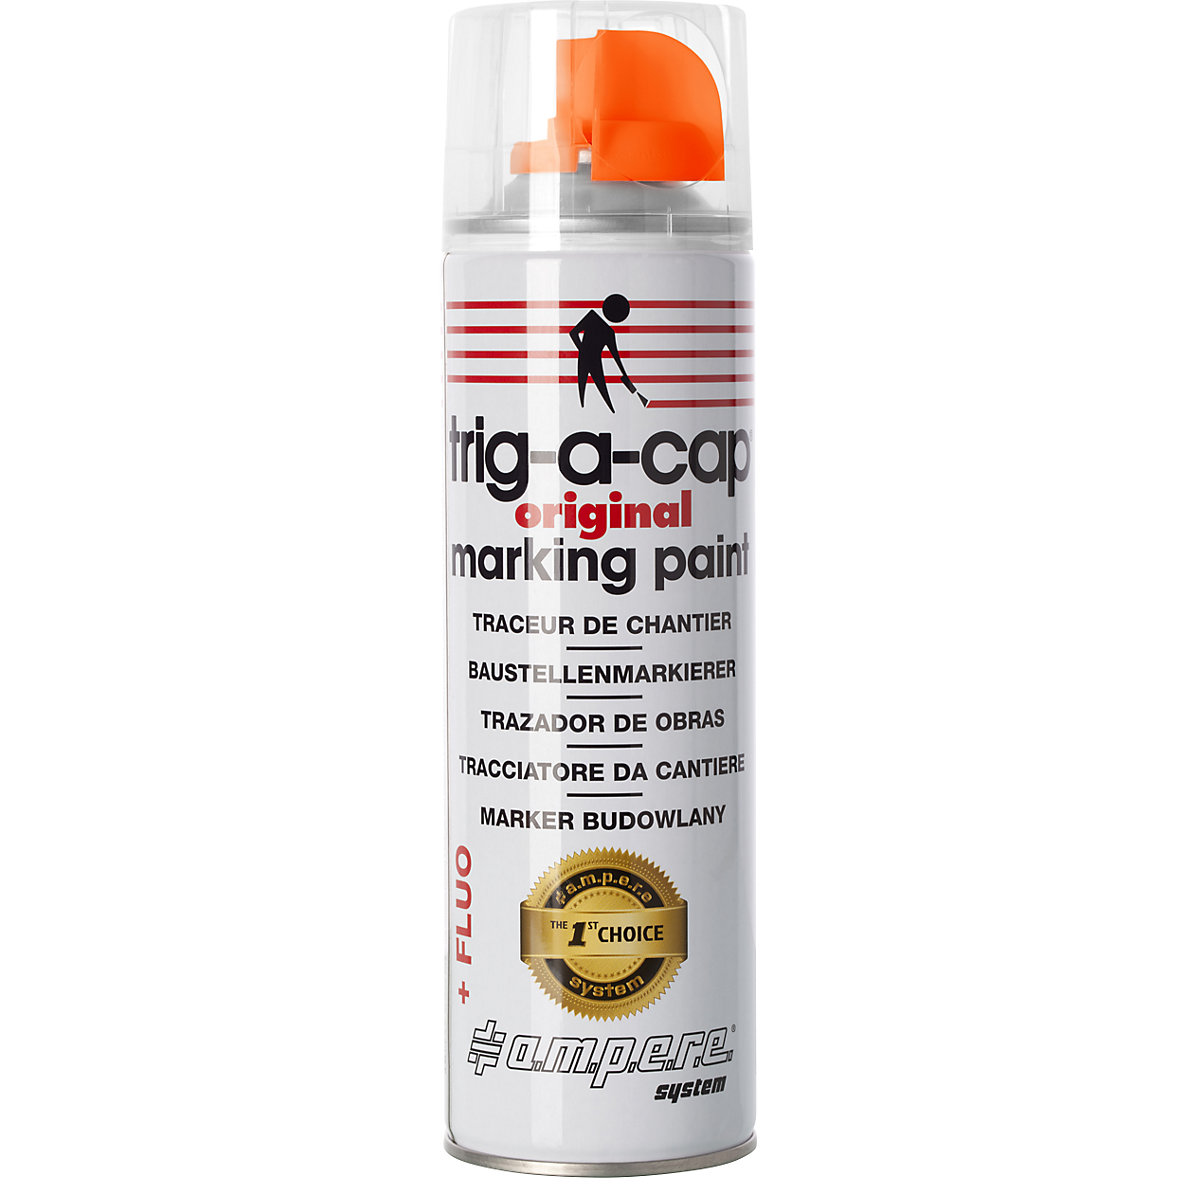 Construction site marking spray – Ampere, content 500 ml, solvent-based, pack of 12 cans, orange fluo-4